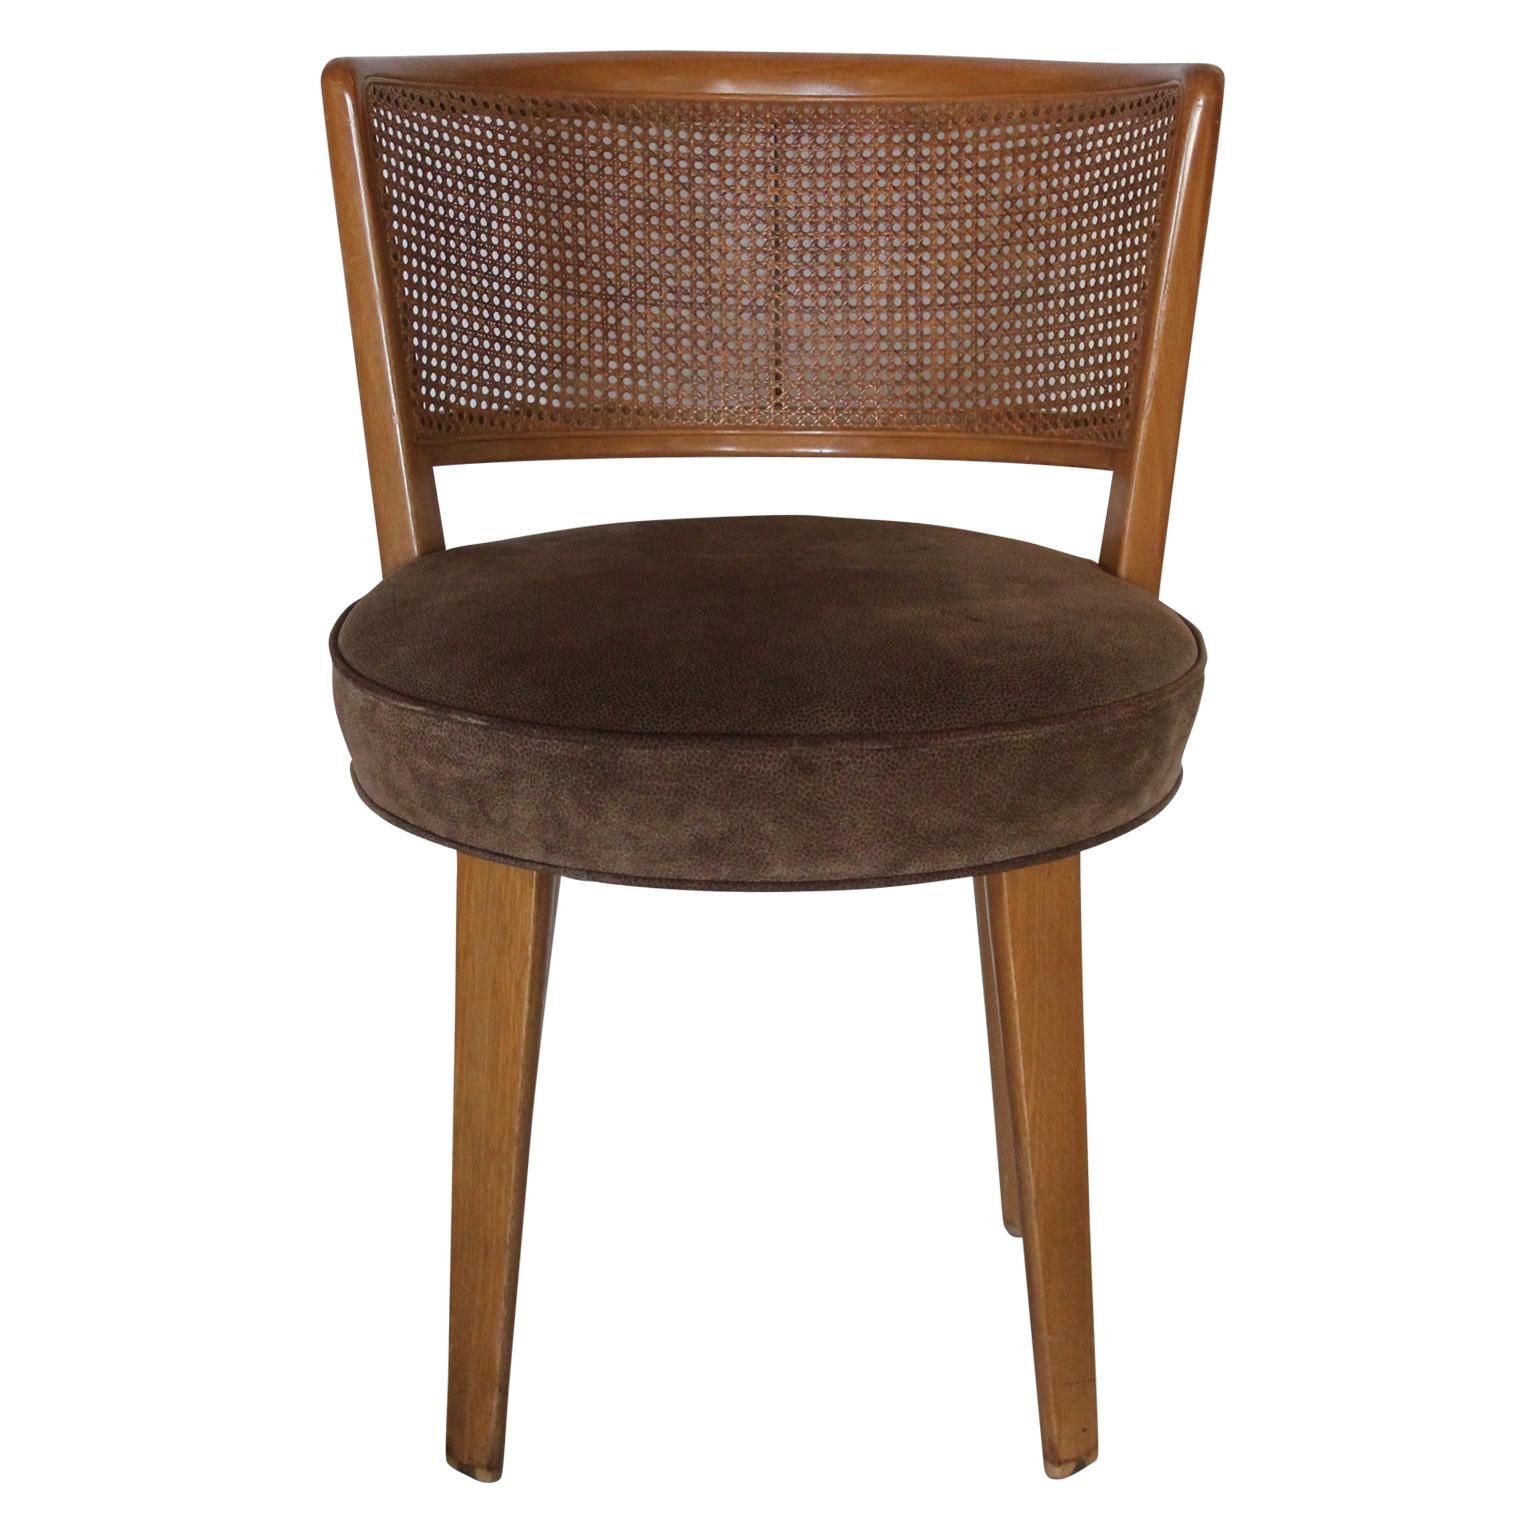 Set of four Mid-Century Modern cane back swivel dining chairs designed by Edward Wormley for Dunbar.
 